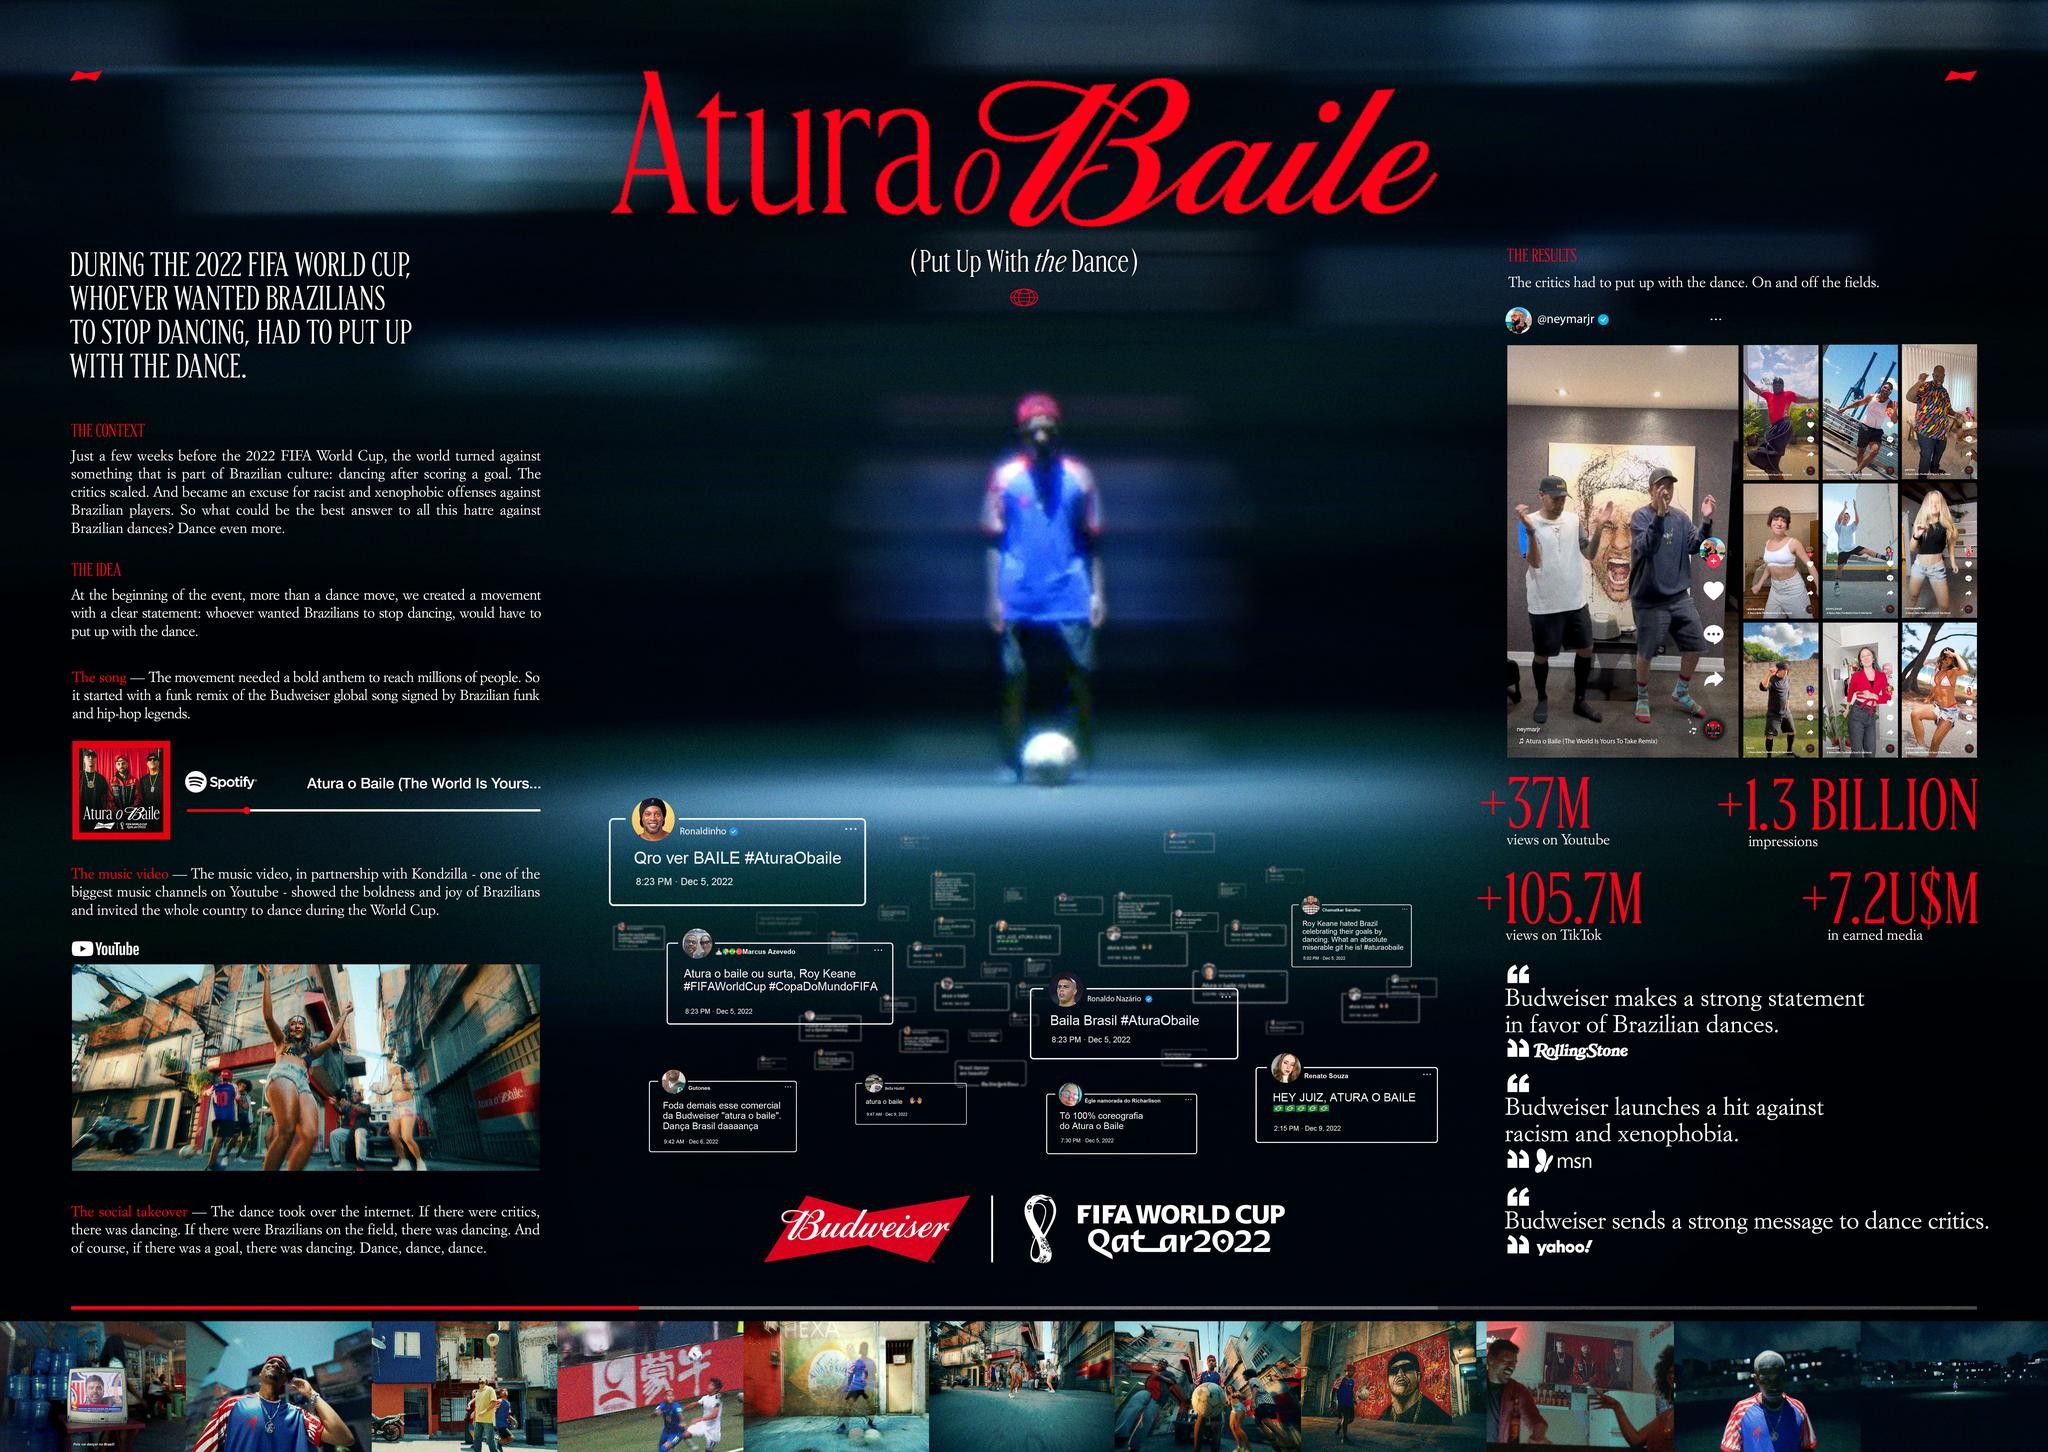 Atura o Baile (Put Up With the Dance)